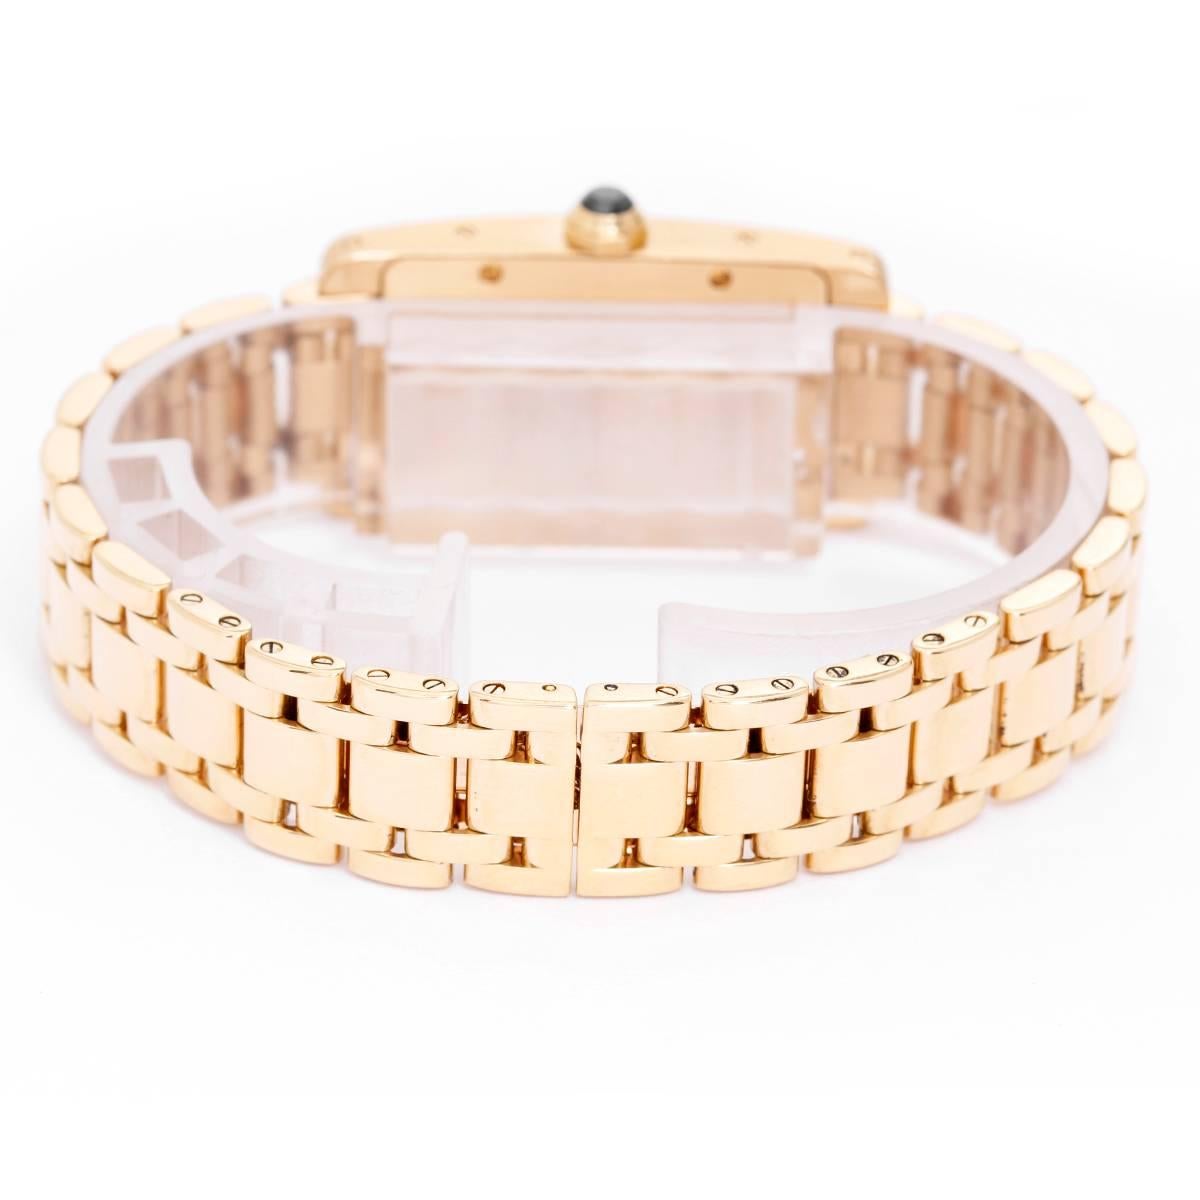 Cartier Tank Americaine Ladies 18k Yellow Gold Watch -  . 18k yellow gold case (19mm x 35mm). Ivory colored dial with black Roman numerals. 18K yellow gold Cartier bracelet will accommodate up to a 6.5 inch wrist. Pre-owned with box.